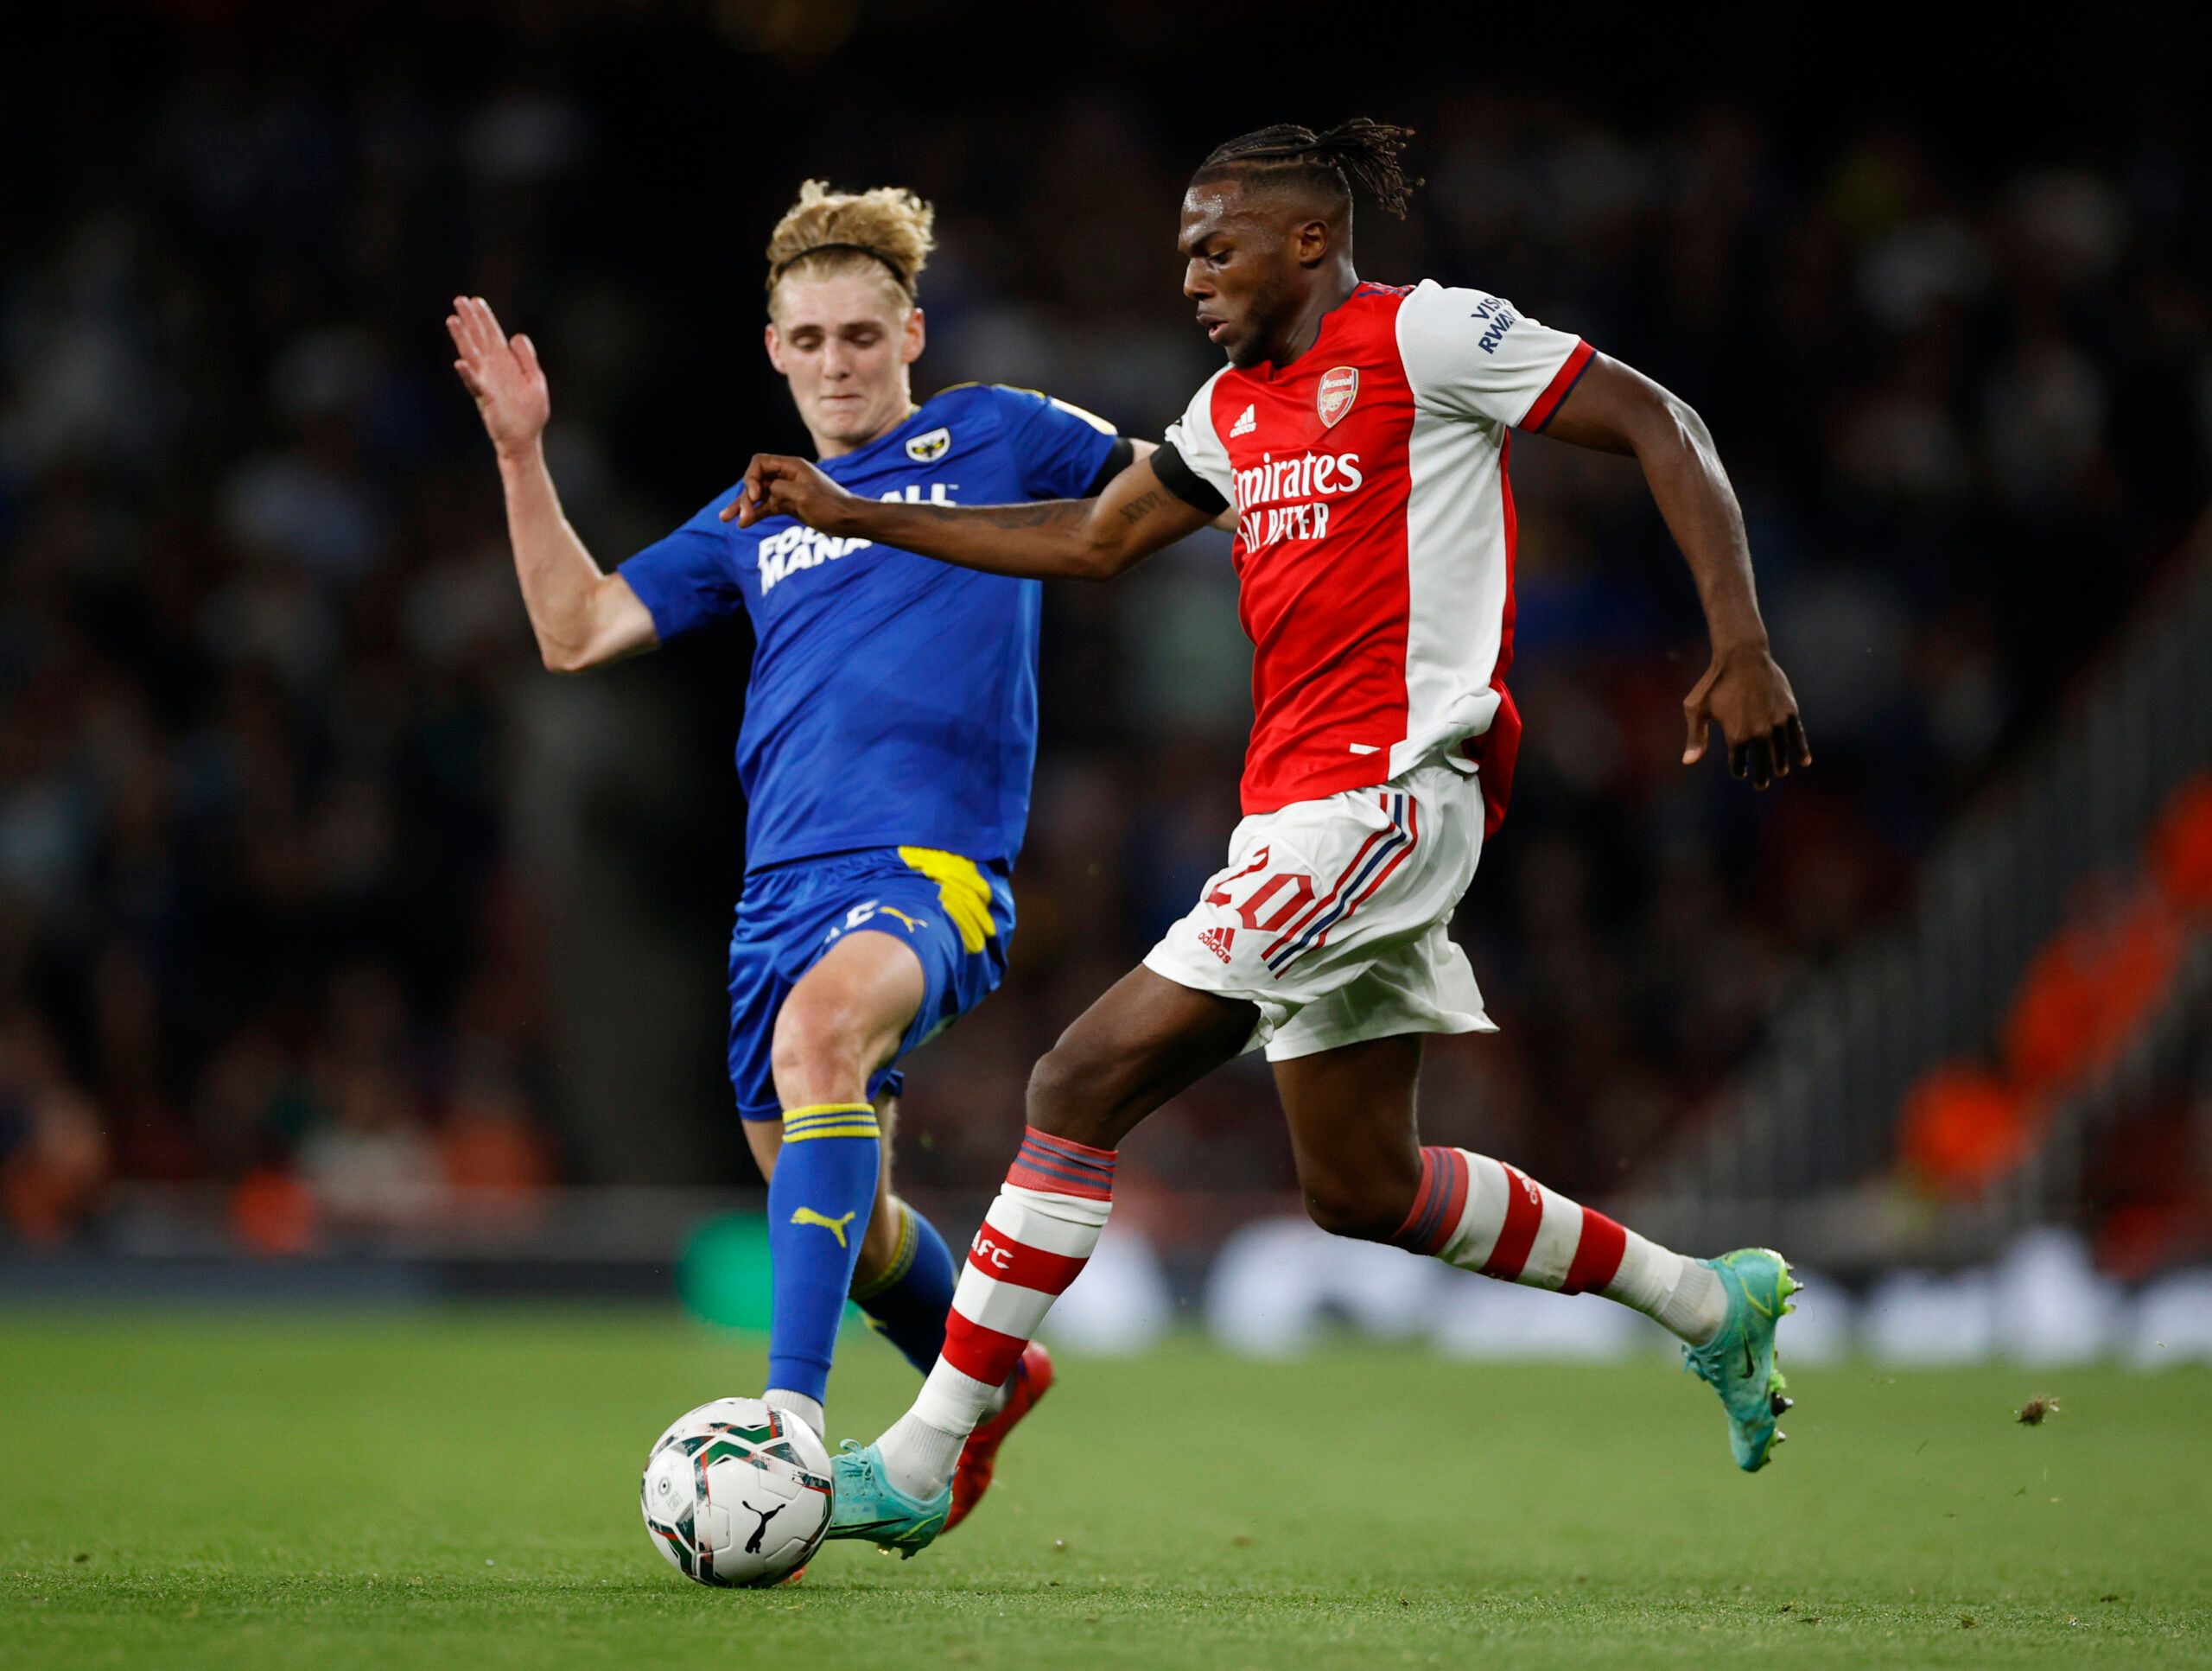 Soccer Football - Carabao Cup - Third Round - Arsenal v AFC Wimbledon - Emirates Stadium, London, Britain - September 22, 2021 AFC Wimbledon's Jack Rudoni in action with Arsenal's Nuno Tavares Action Images via Reuters/John Sibley EDITORIAL USE ONLY. No use with unauthorized audio, video, data, fixture lists, club/league logos or 'live' services. Online in-match use limited to 75 images, no video emulation. No use in betting, games or single club /league/player publications.  Please contact your